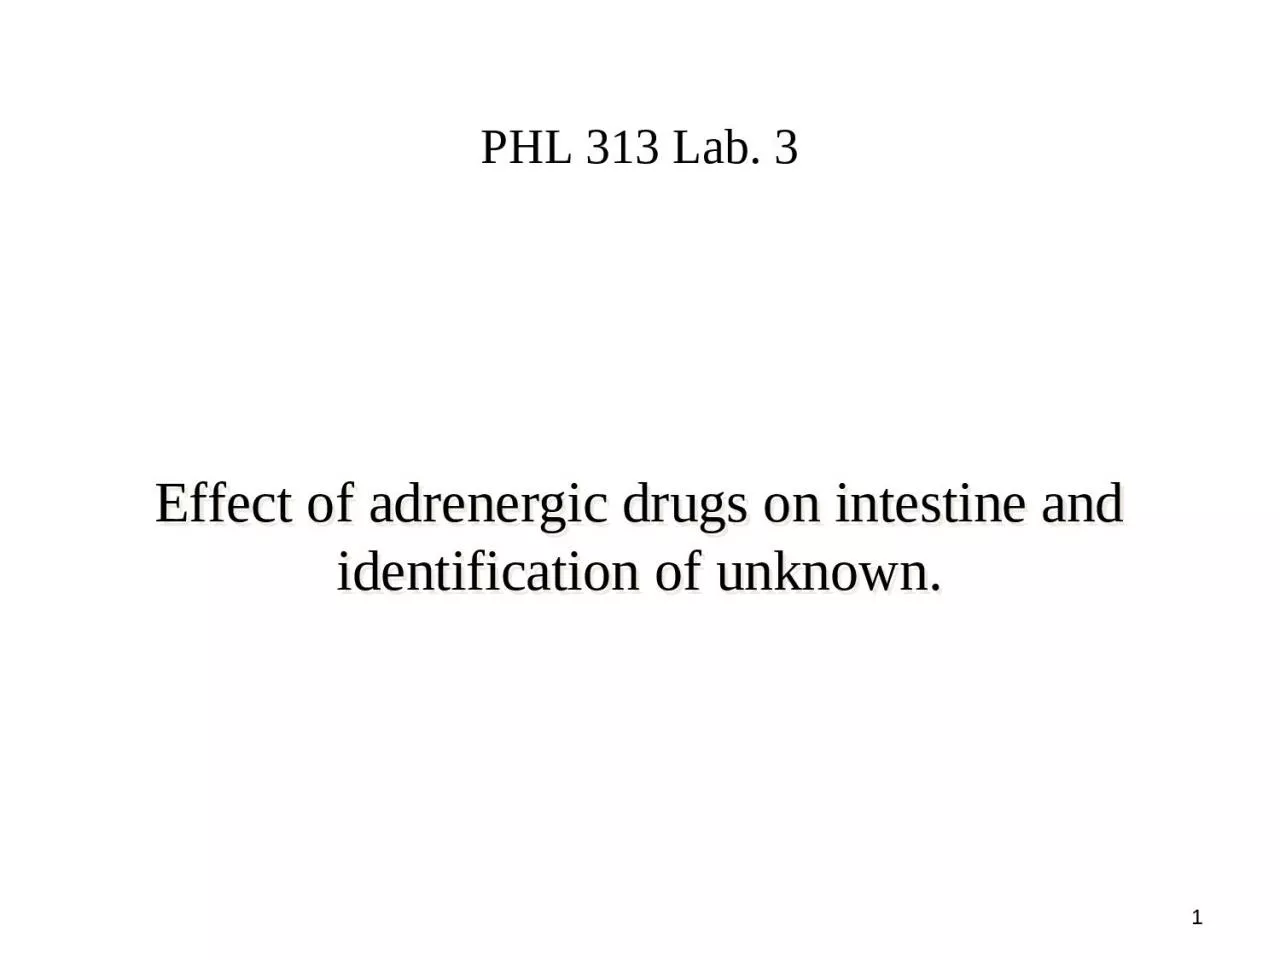 1 Effect of adrenergic drugs on intestine and identification of unknown.